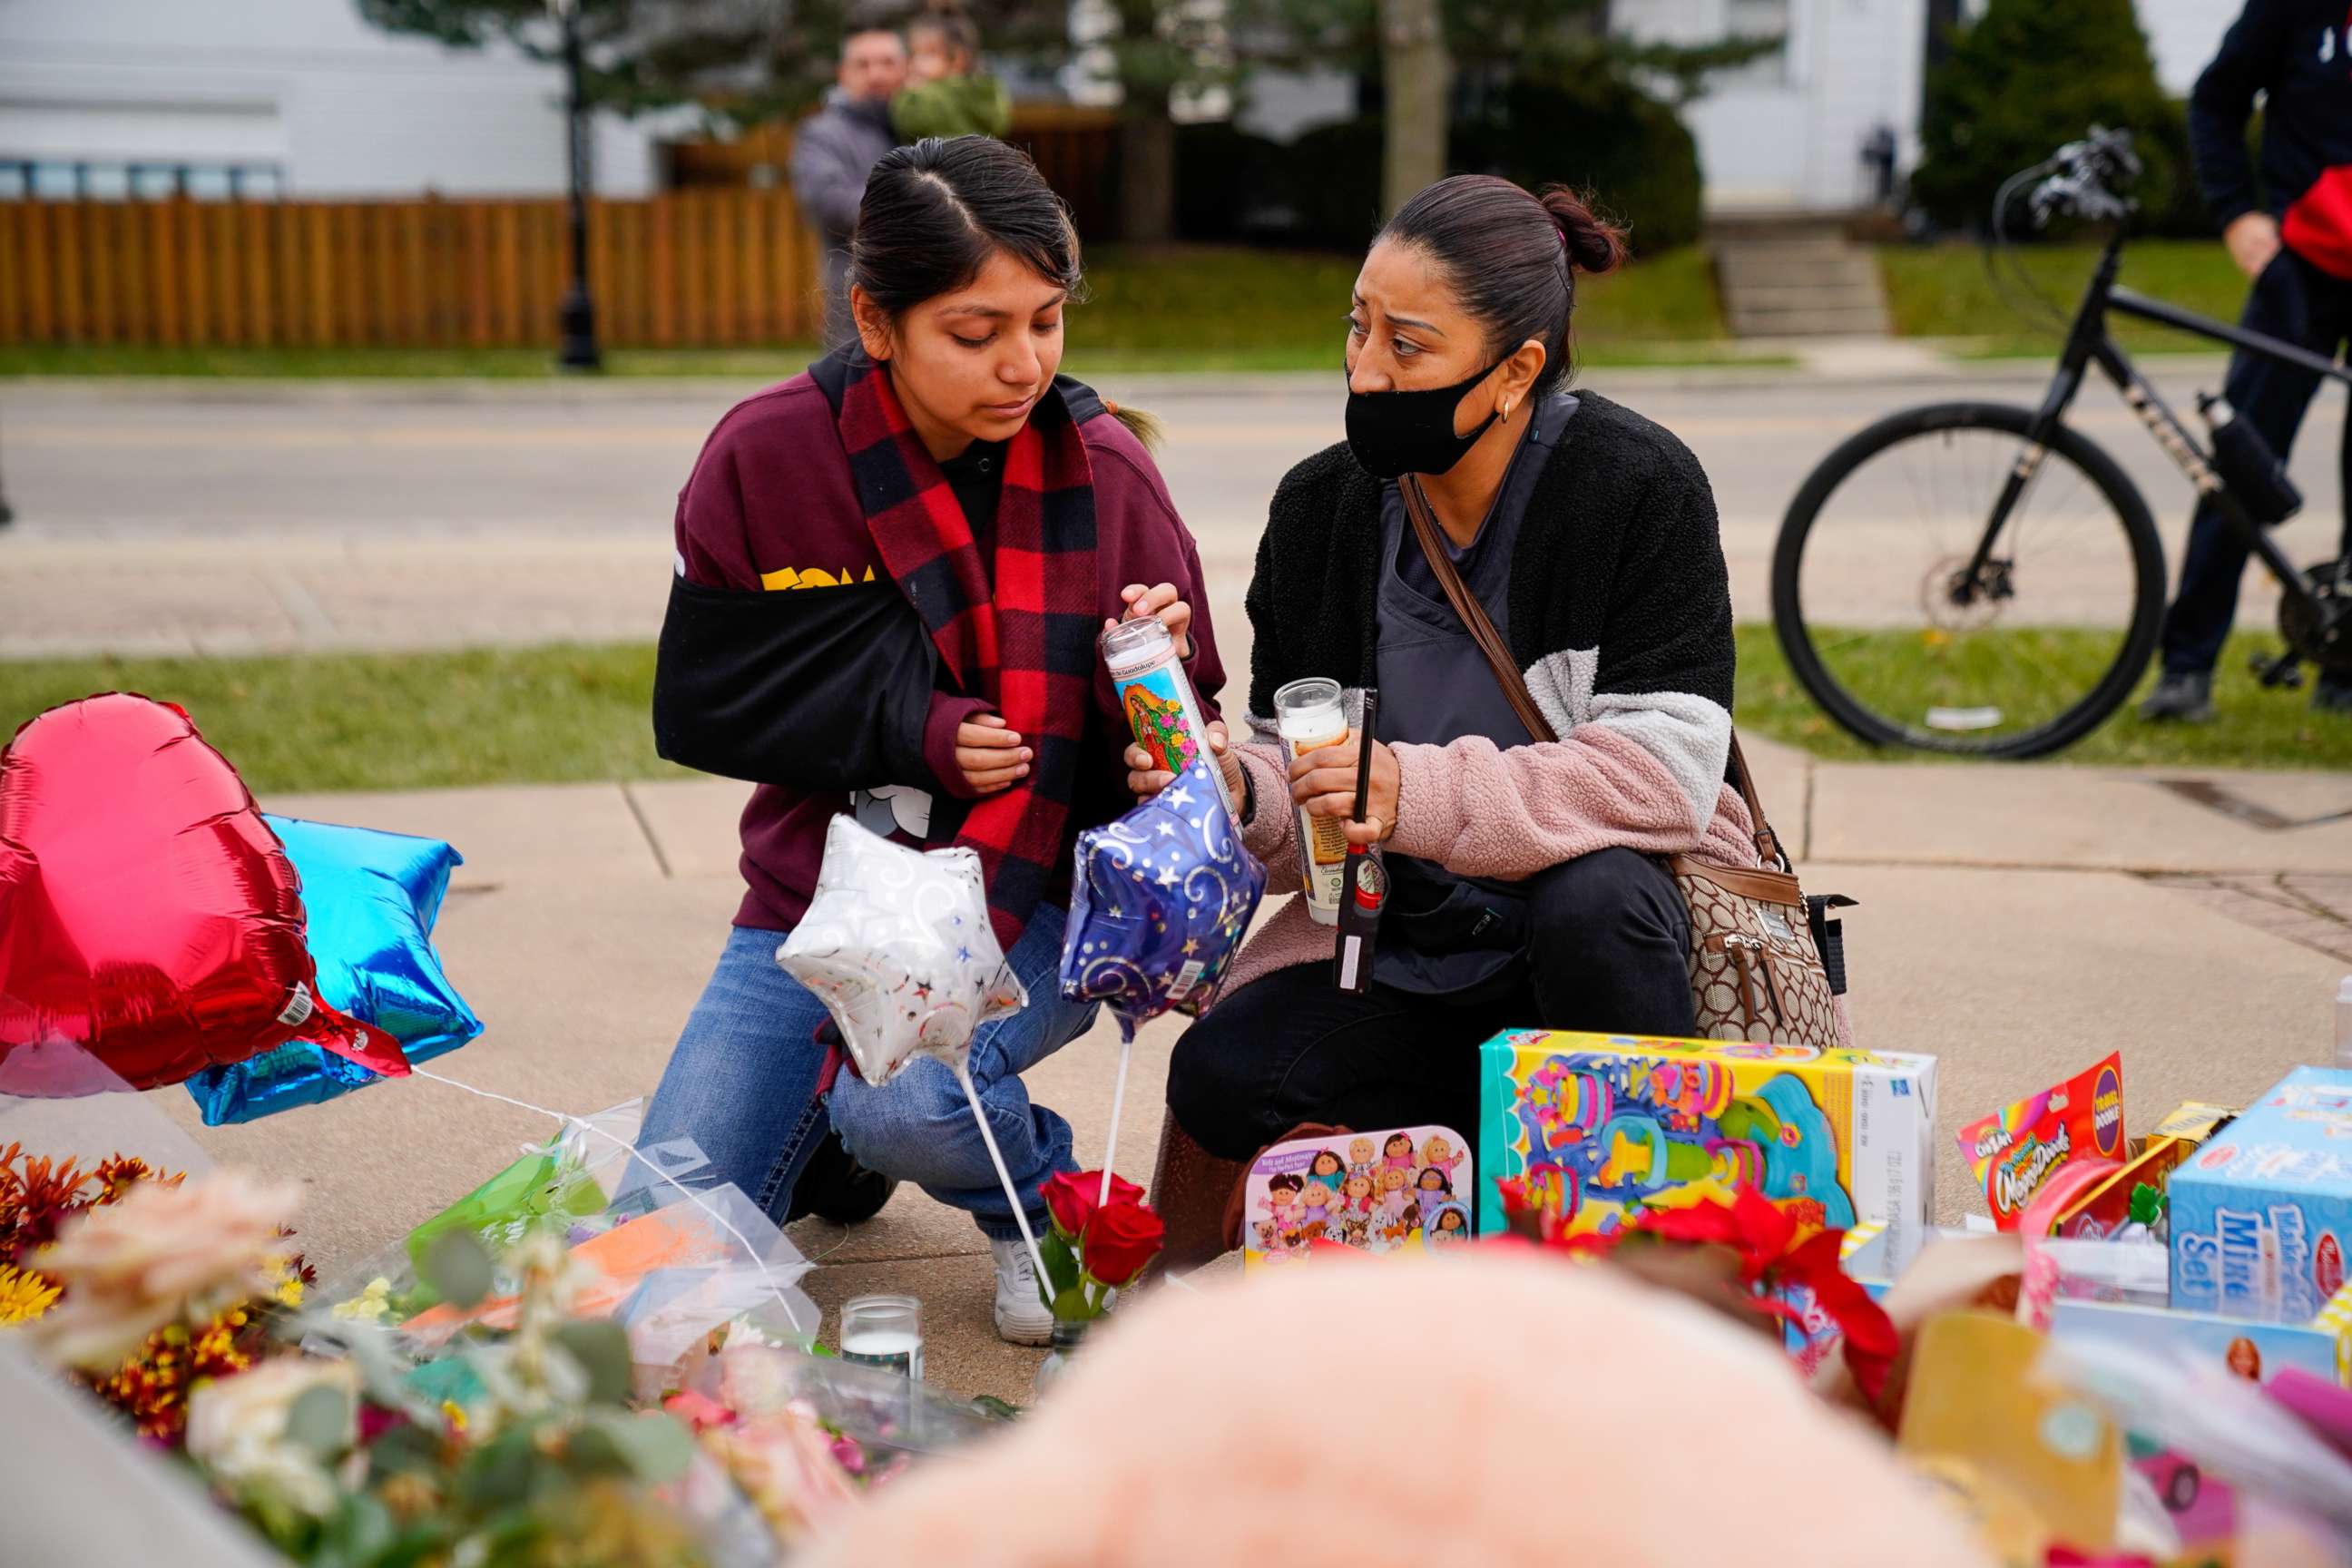 PHOTO: Sasha Catalan, 17, visits a memorial with her aunt Rocio Castillo after being injured when a car plowed through a holiday parade in Waukesha, Wisc., Nov. 24, 2021.